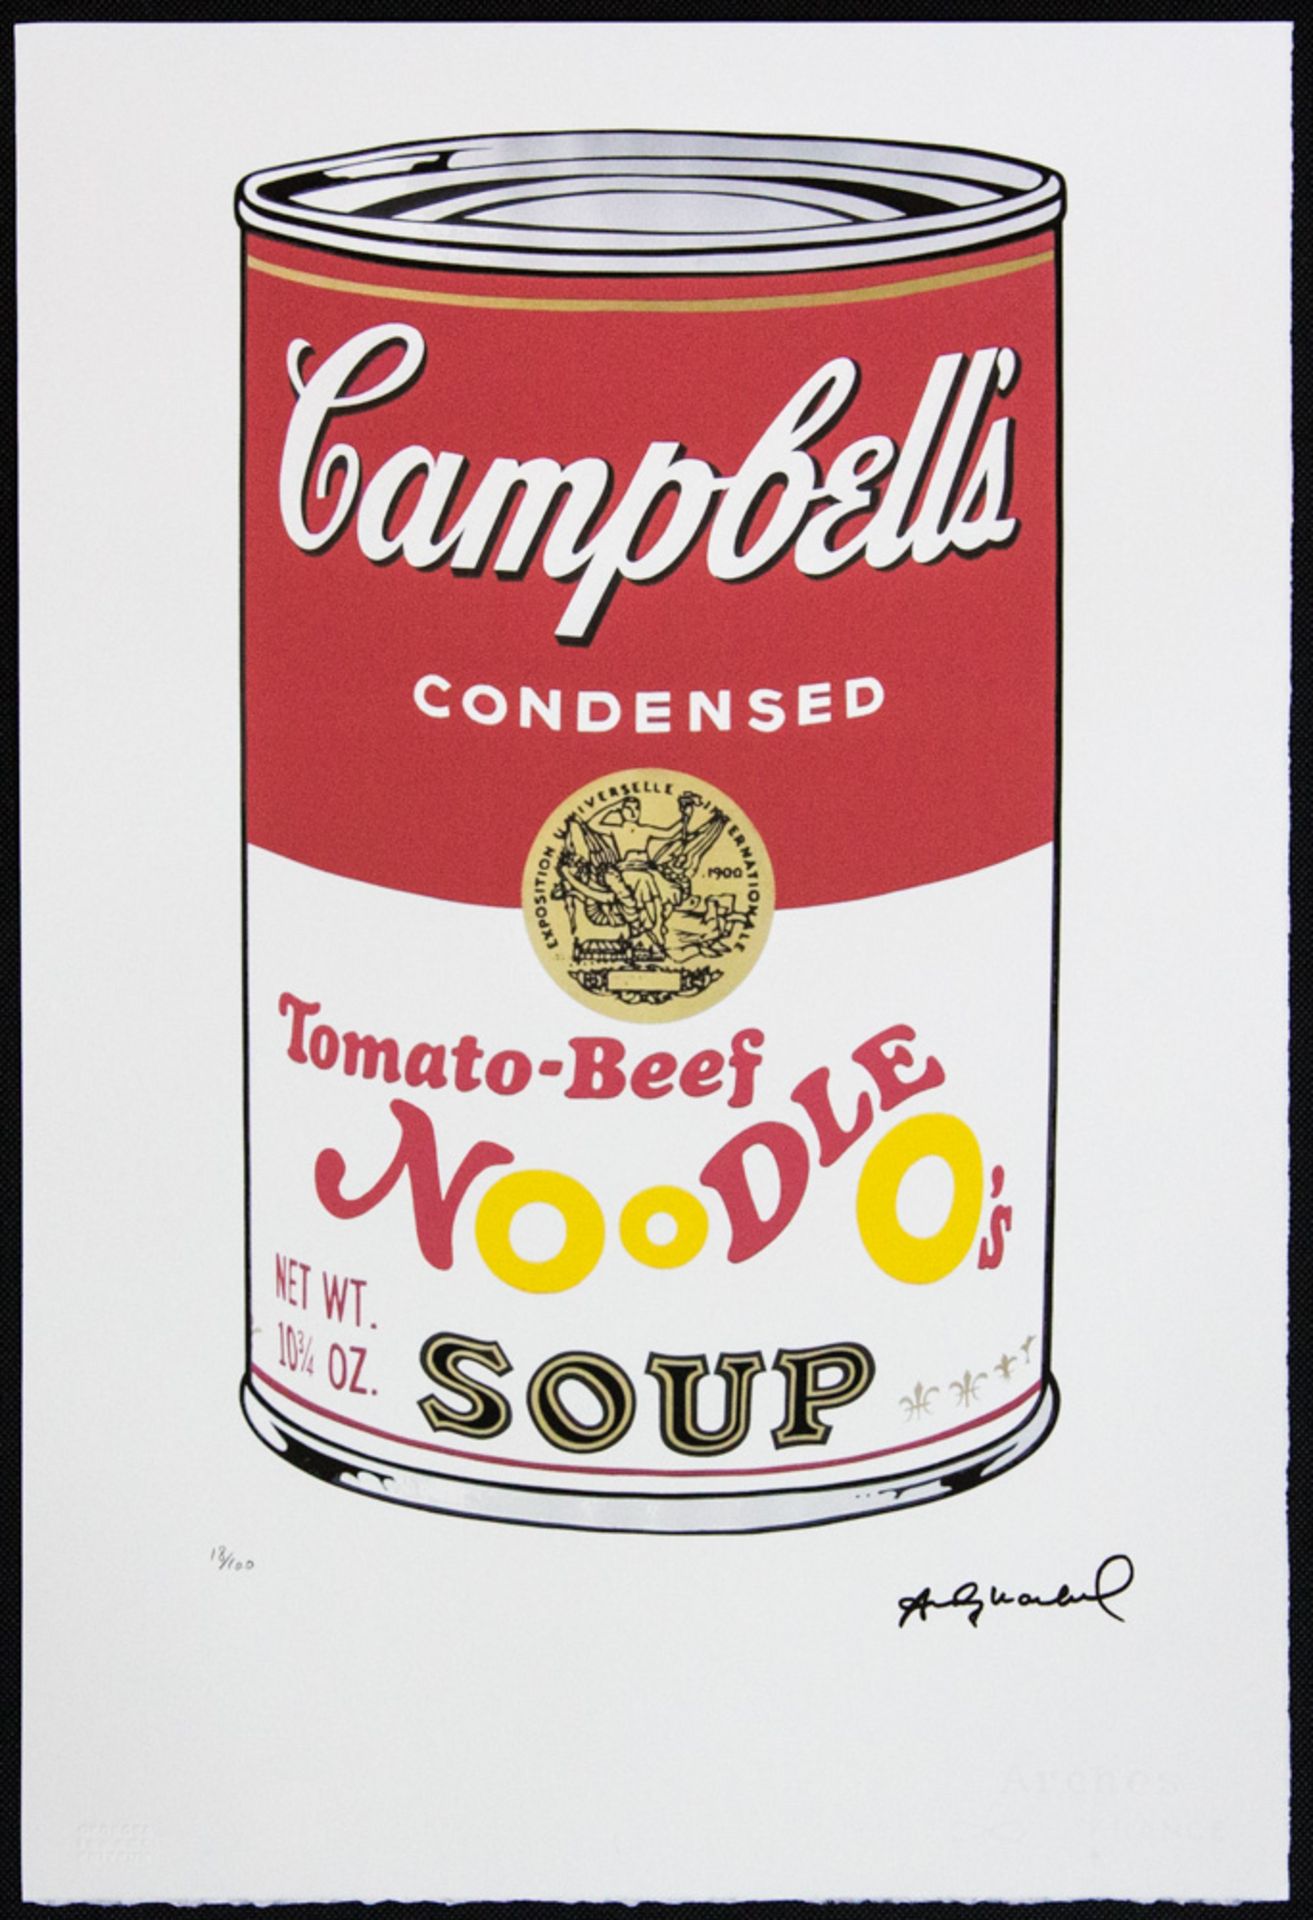 Andy Warhol 'Campbell's Soup: Tomato-Beef Noodle O's' - Image 2 of 6